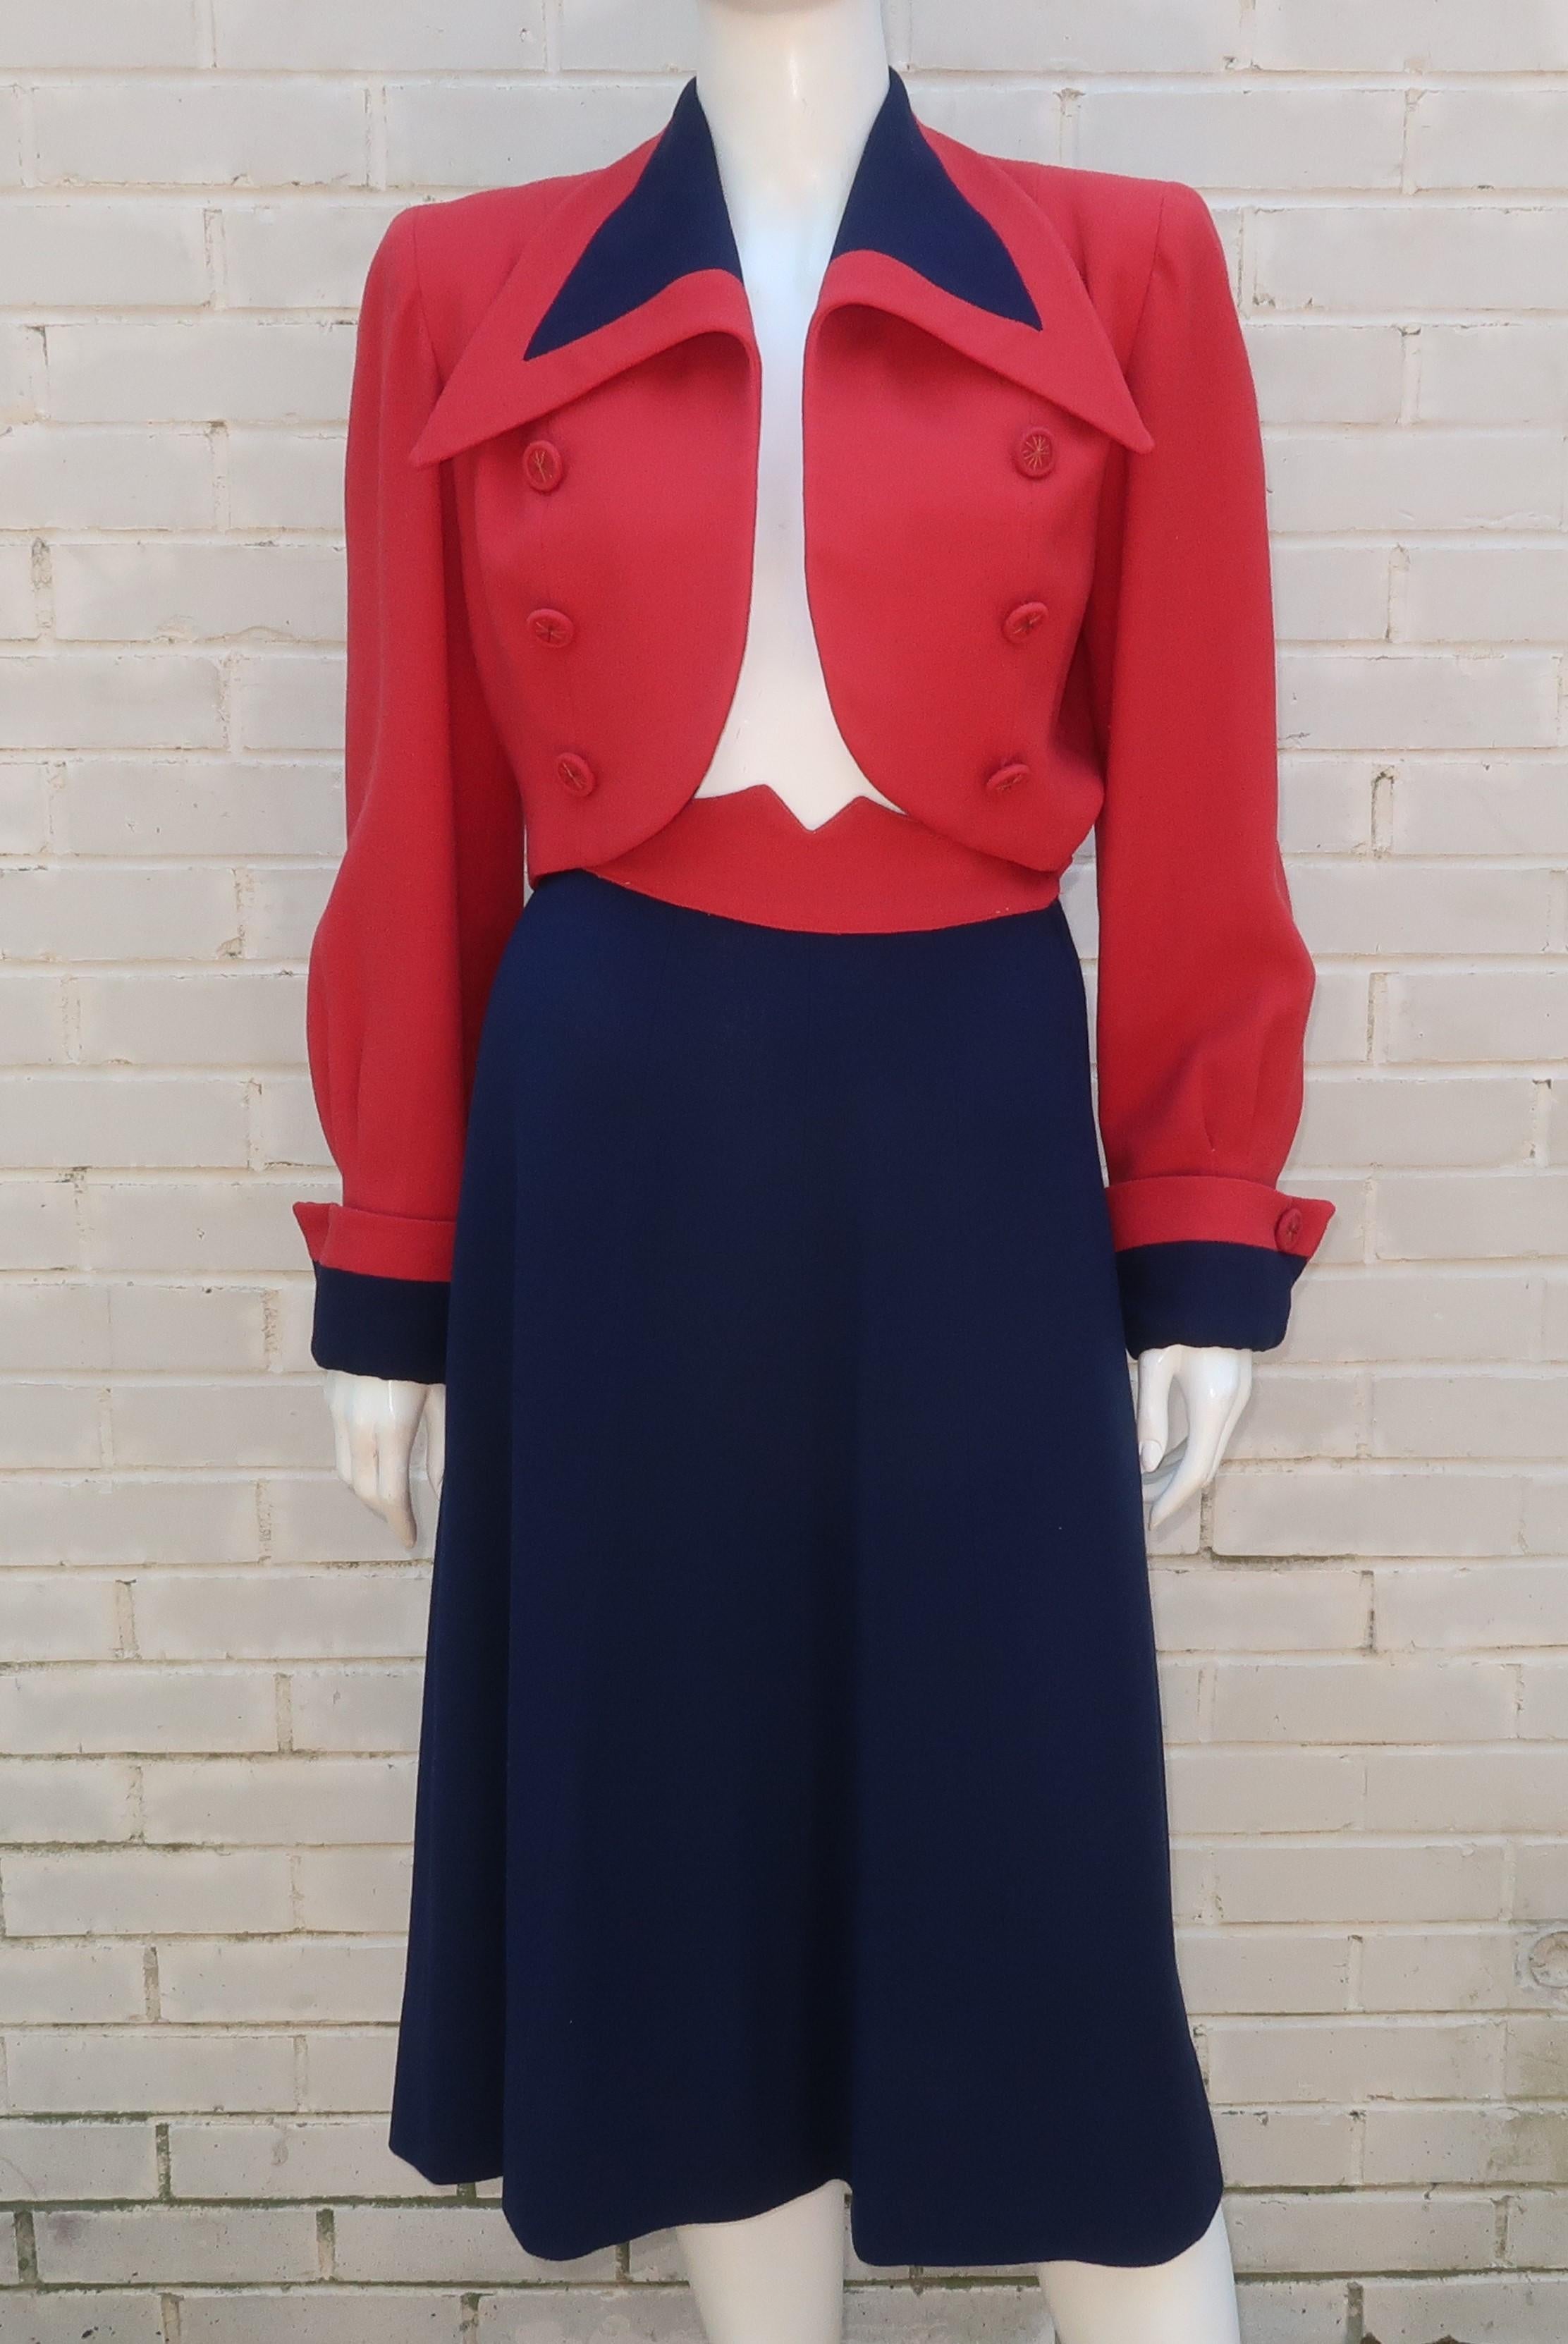 1940's patriotic style red & blue crepe skirt suit with cropped jacket.  The jacket is a stylized version of a military look with pointy wide collar, exaggerated shoulders, upturned cuffs and a double row of decorative buttons.  The skirt zips and